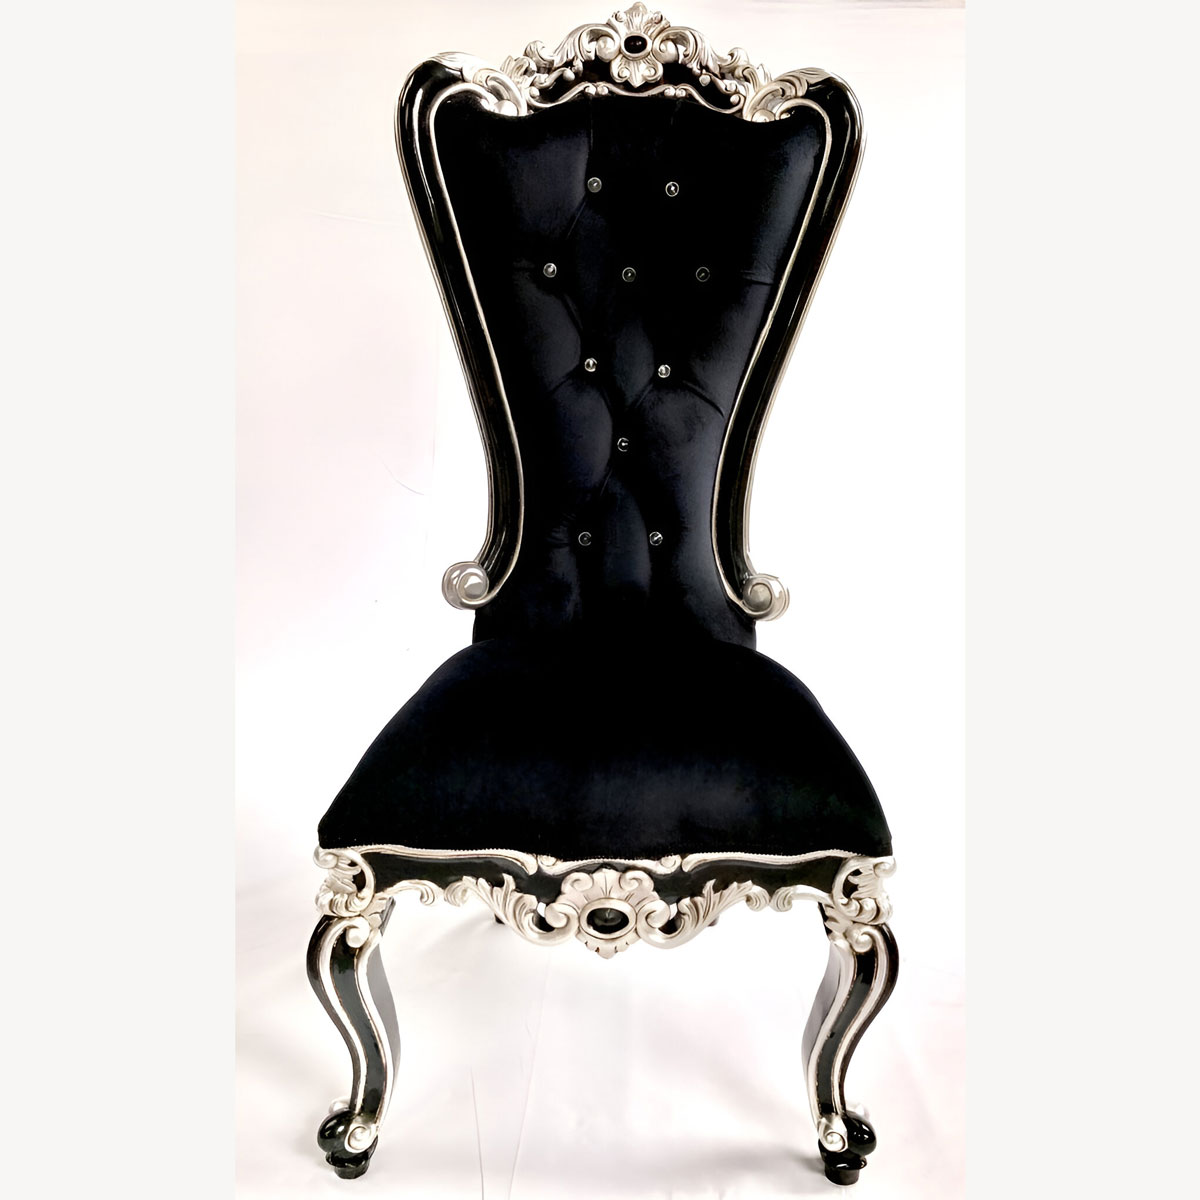 Black Mayfair Dining Throne Black And Silver Baroque With Crystal Buttons 1 - Hampshire Barn Interiors - Black Mayfair Dining Throne Black And Silver Baroque With Crystal Buttons -